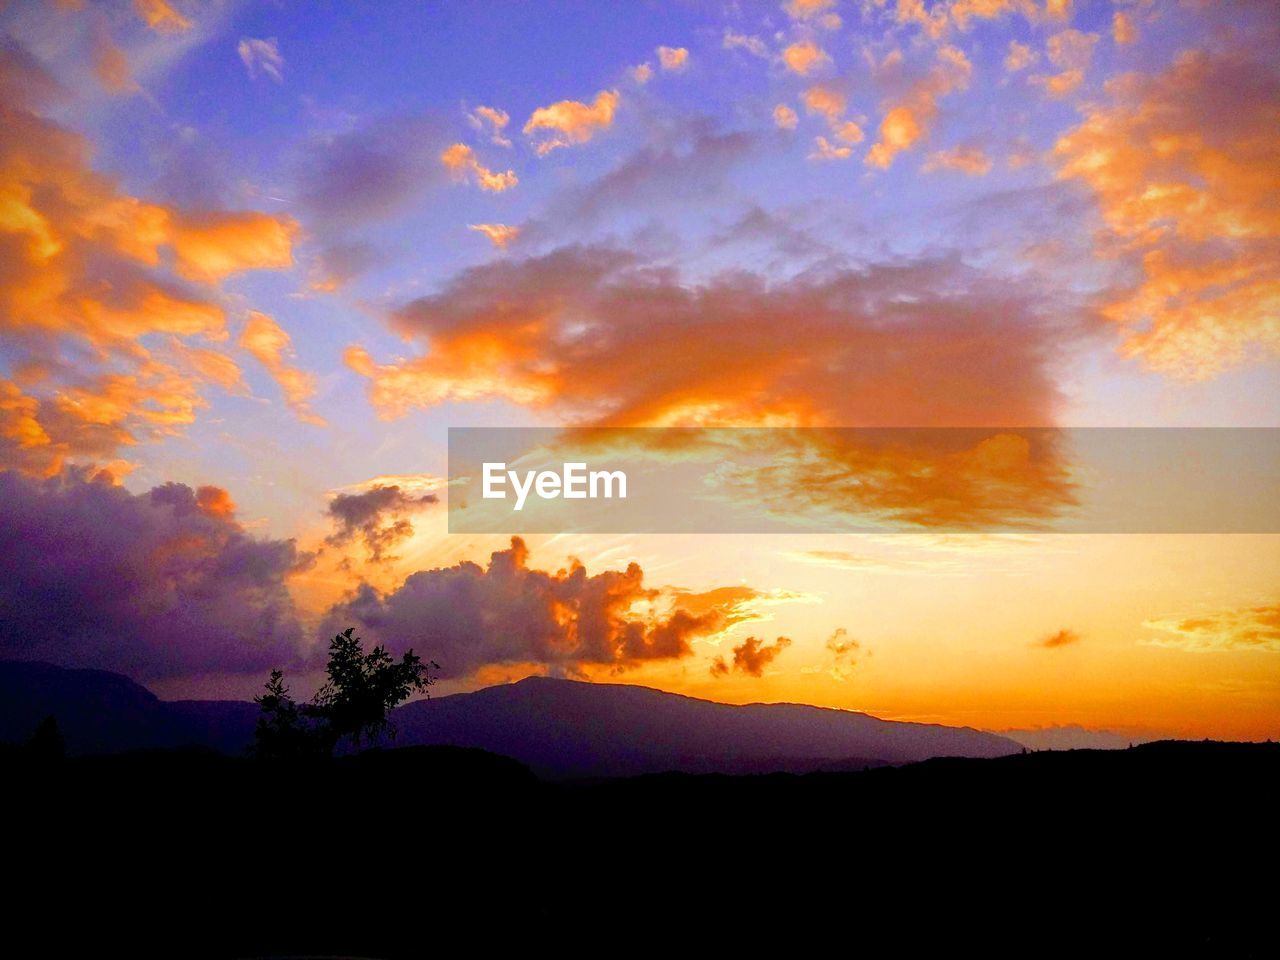 SCENIC VIEW OF SILHOUETTE MOUNTAINS AGAINST DRAMATIC SKY DURING SUNSET